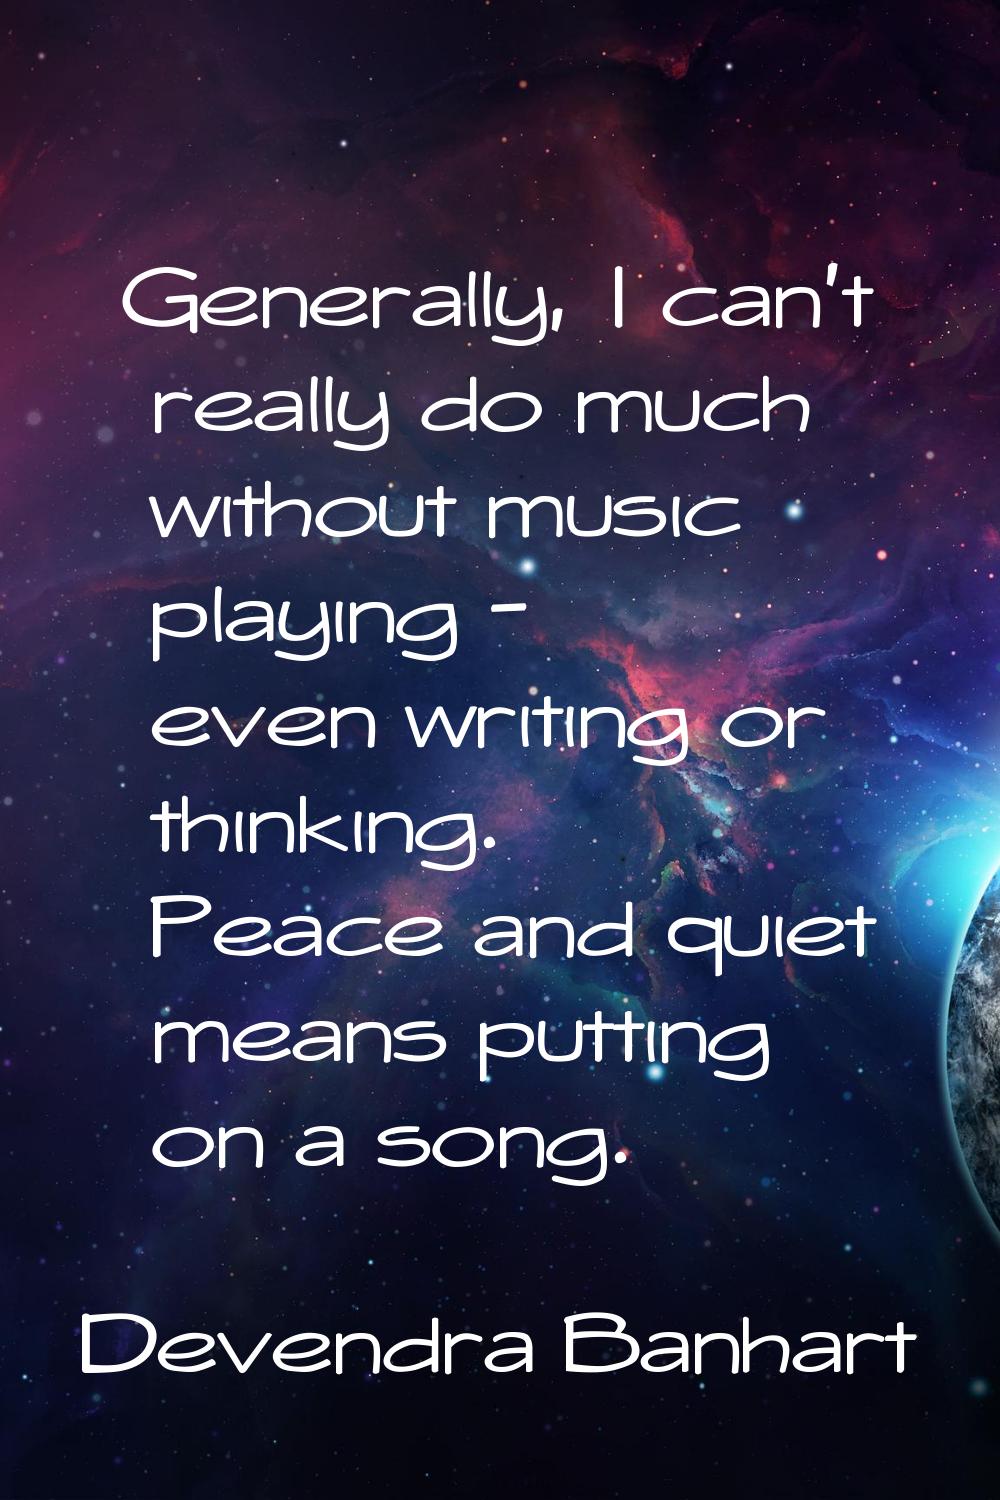 Generally, I can't really do much without music playing - even writing or thinking. Peace and quiet